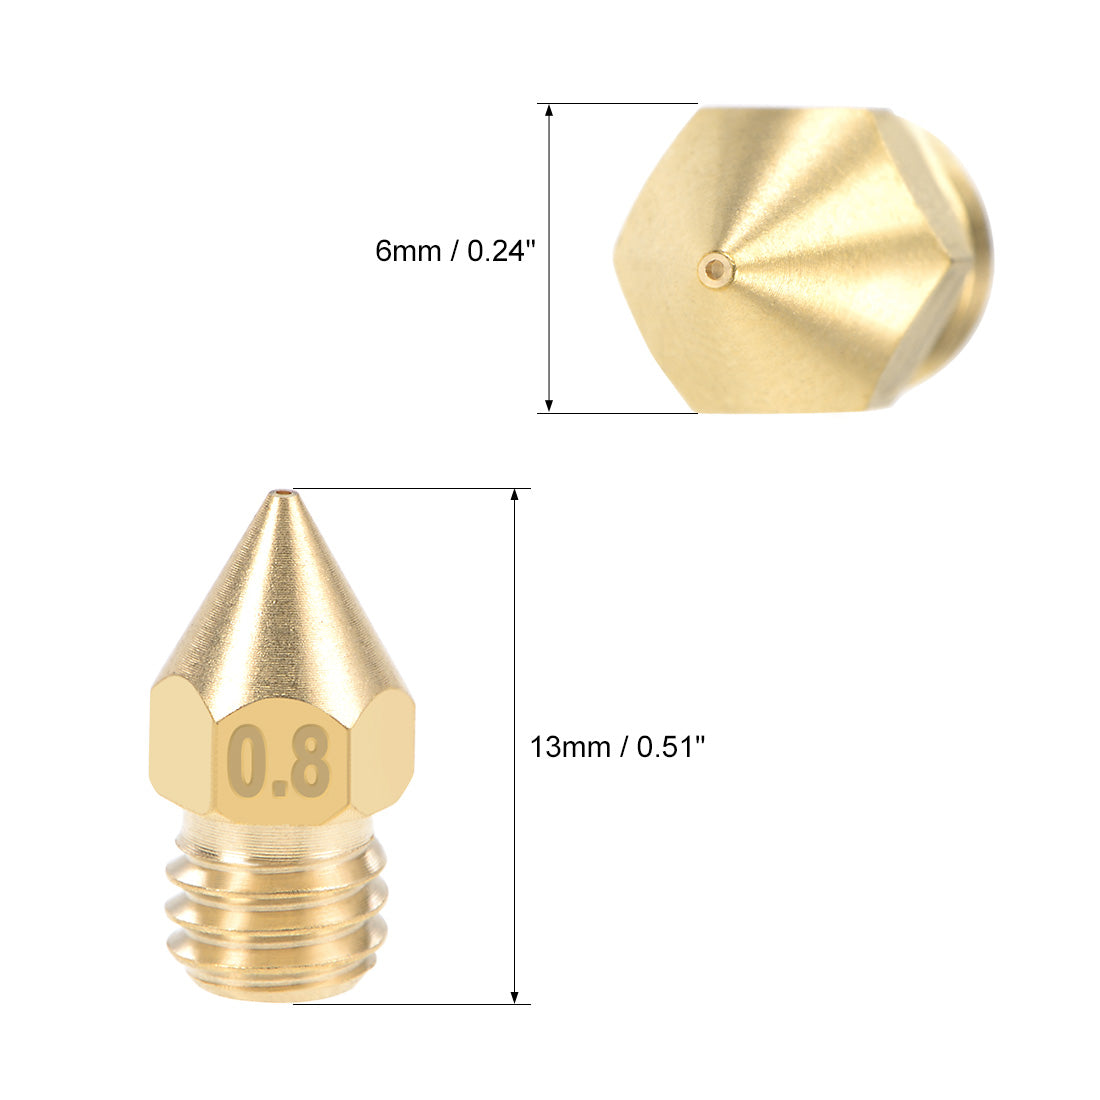 uxcell Uxcell 0.8mm 3D Printer Nozzle Head M6 for MK8 1.75mm Extruder Print, Brass 5pcs